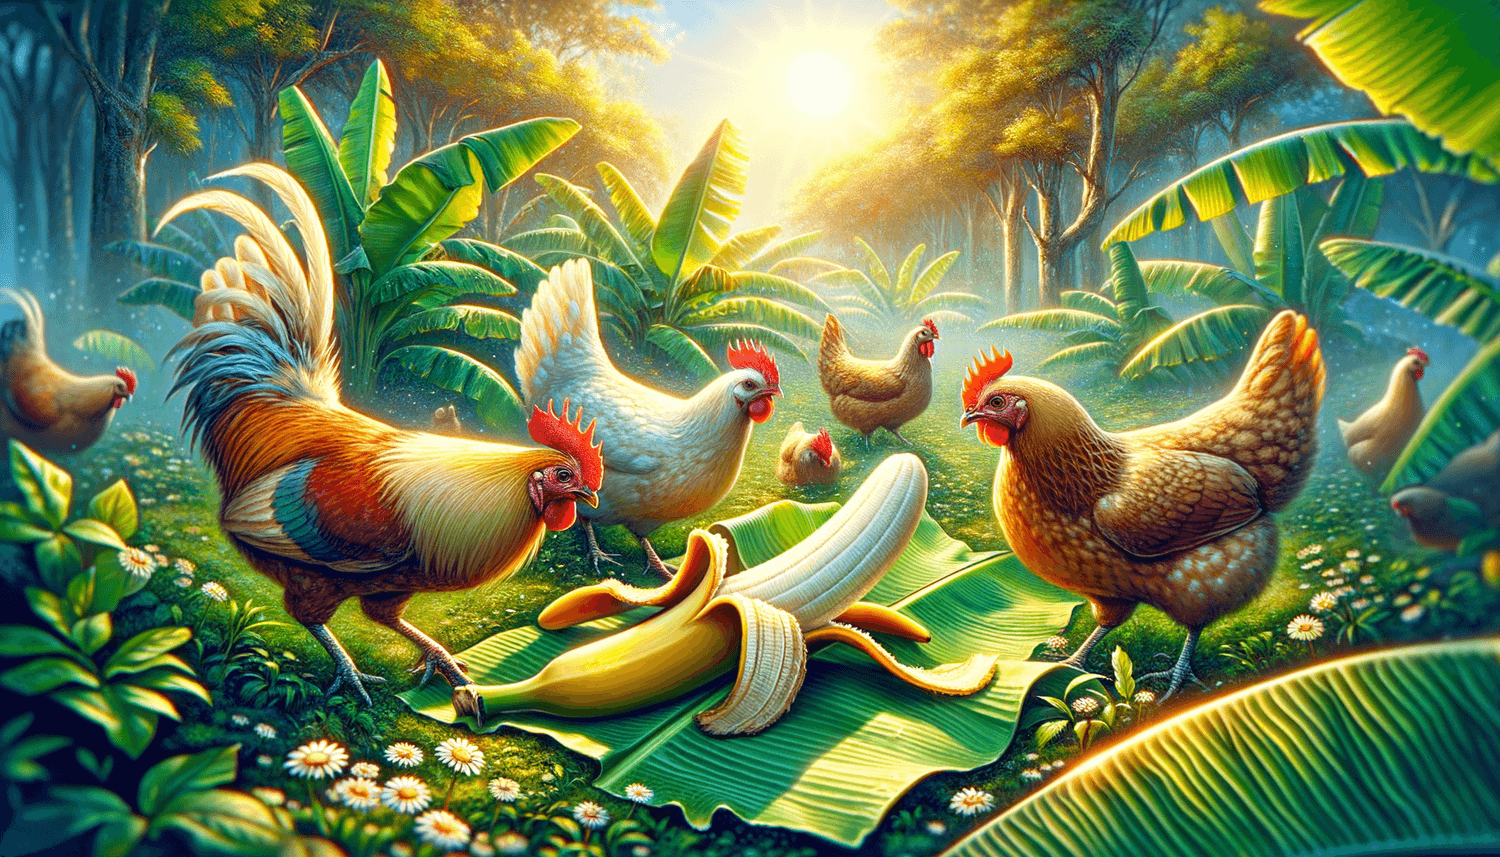 Can Chickens Eat Banana Leaves?